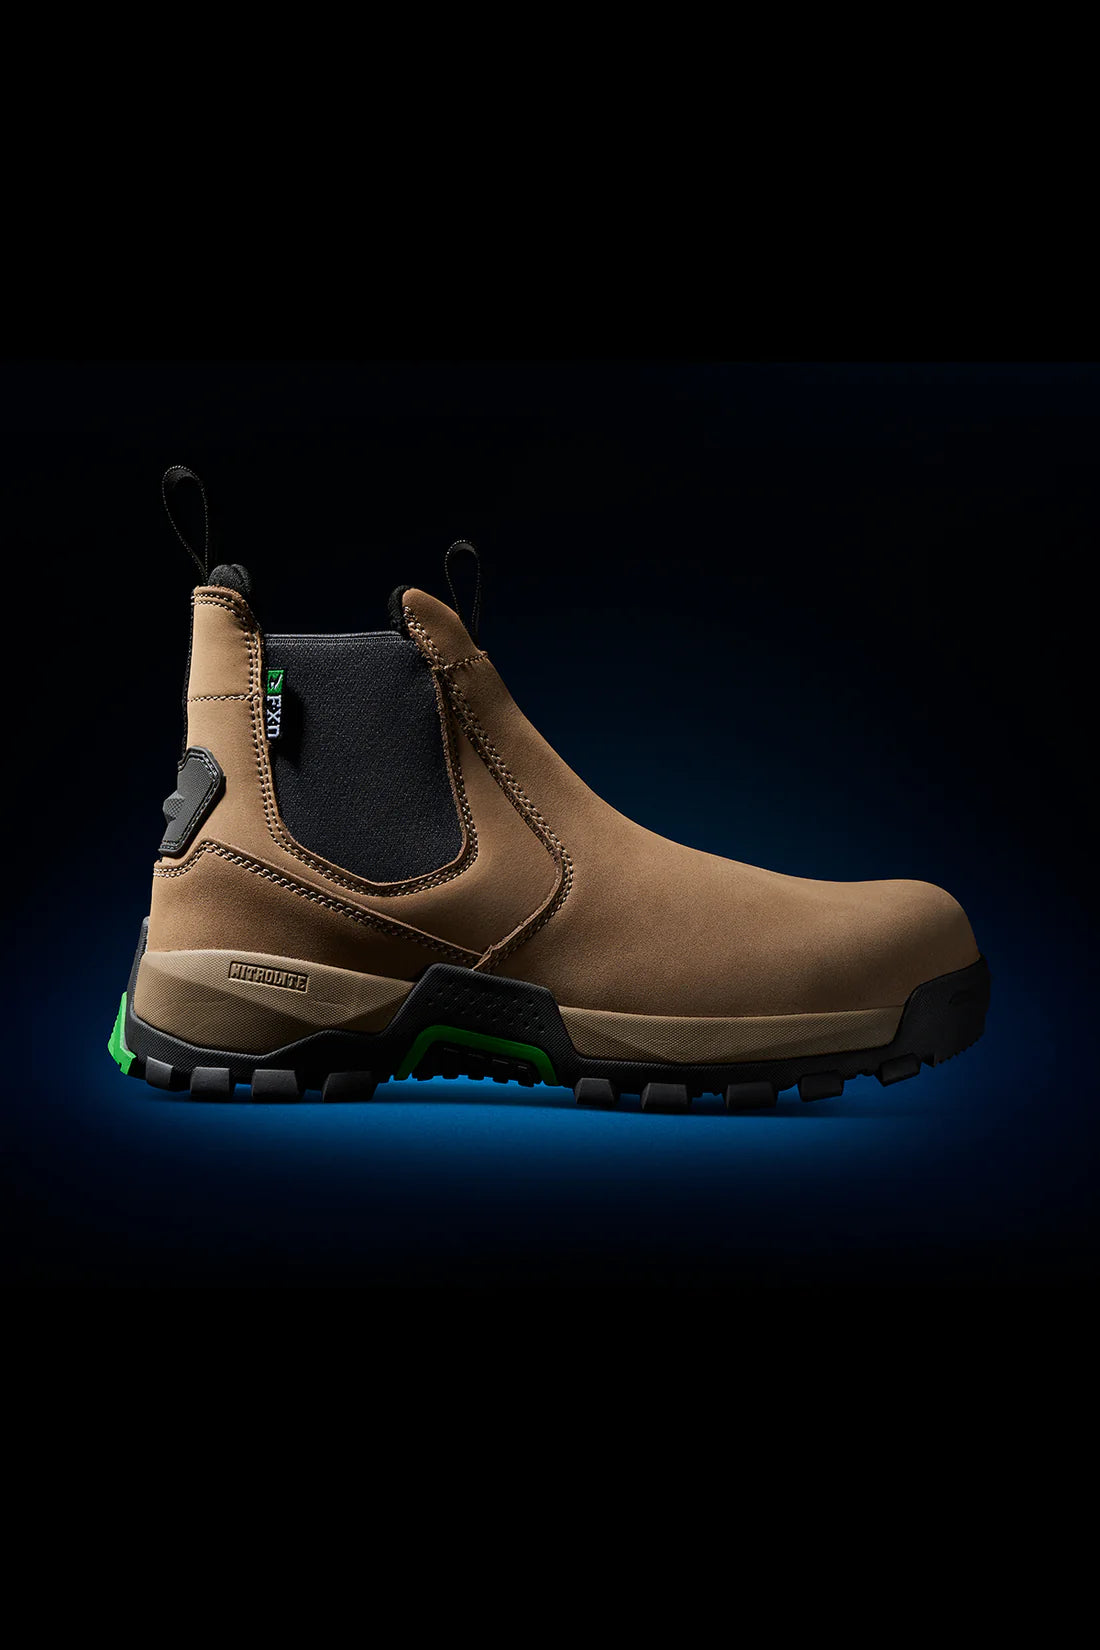 Elastic Side Safety Boots - made by FXD Footwear